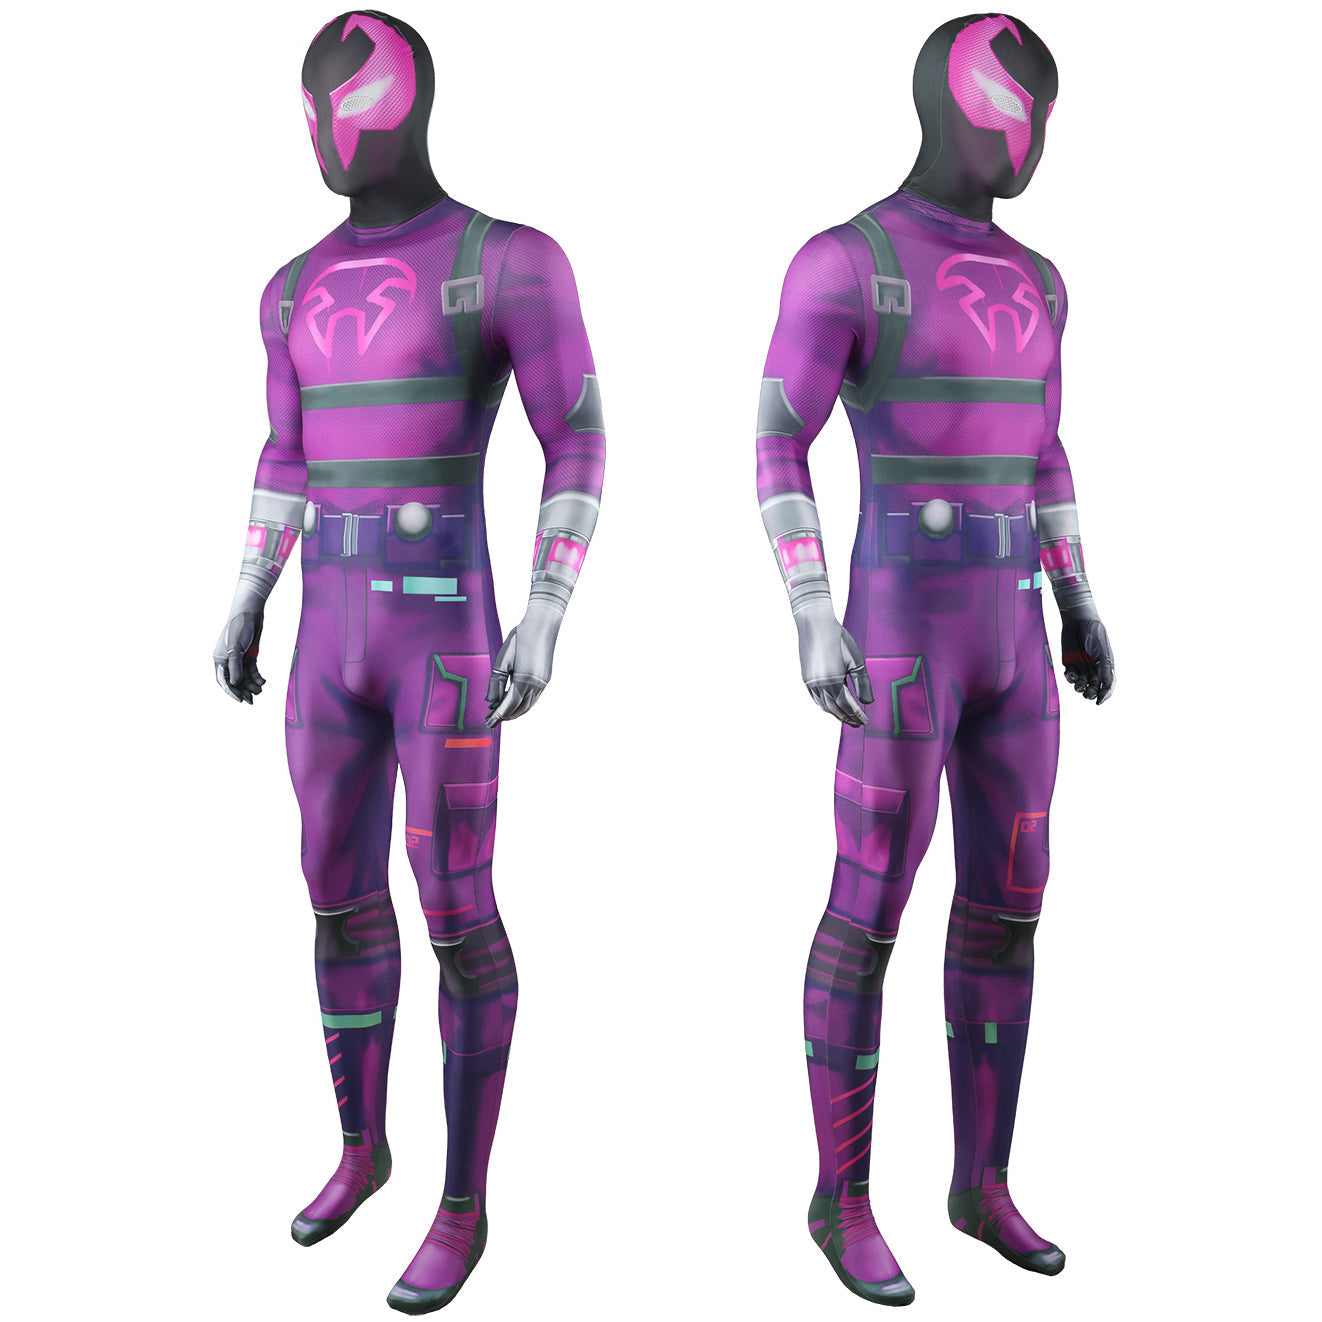 The Prowler Miles G Morales Spider-man Jumpsuit Cosplay Costume